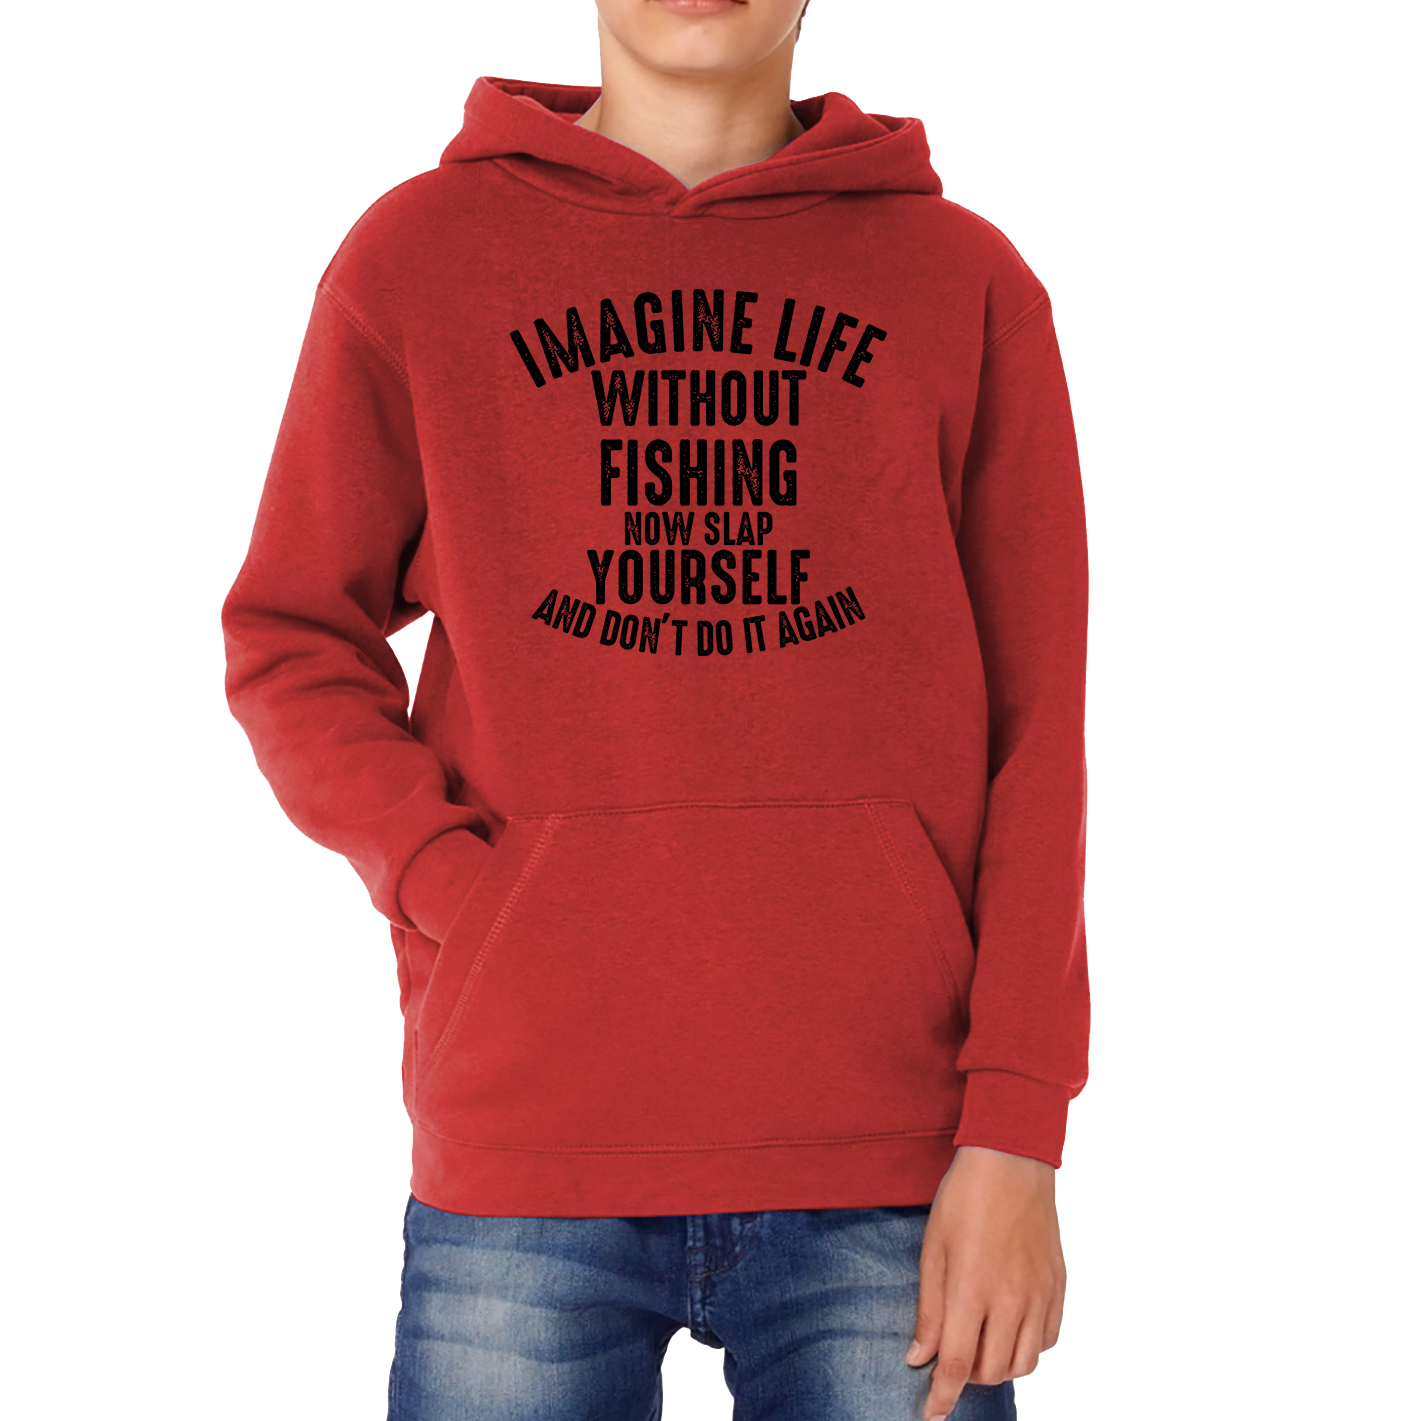 Imagine Life Without Fishing Now Slap Yourself And Don't Do It Again Hoodie Fisherman Fishing Adventure Hobby Funny Kids Hoodie